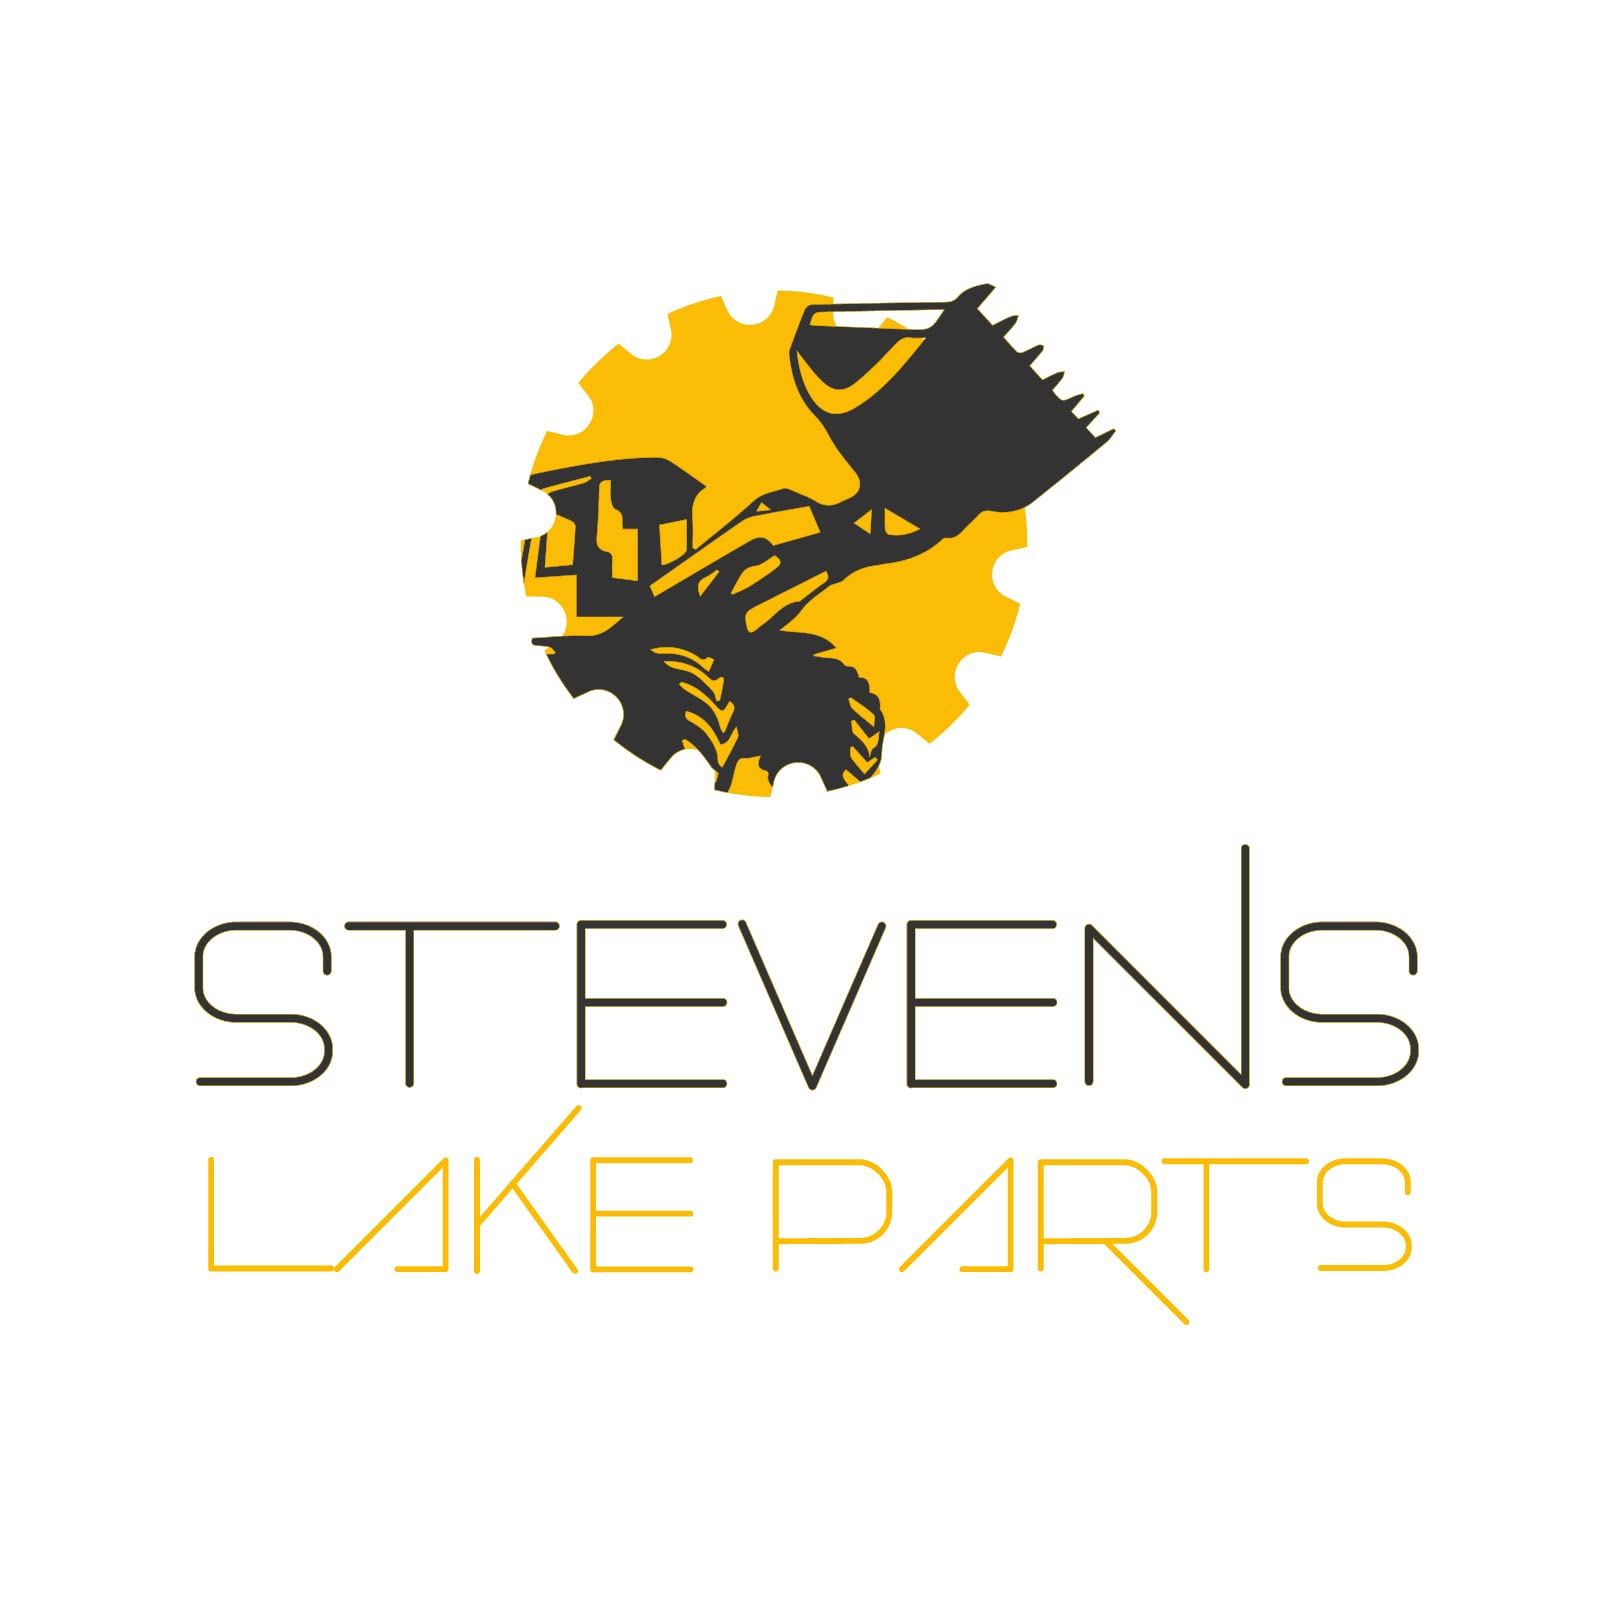 Stevens Lake Parts One New Scraper Bar Fits Toro CR20, CR20R, S200, S620 Models Interchangeable with 23-3170, 23-3170-A, 233170, 233170-A, 708108, 708122, 73-014, 73014, 780106, B1SB5515